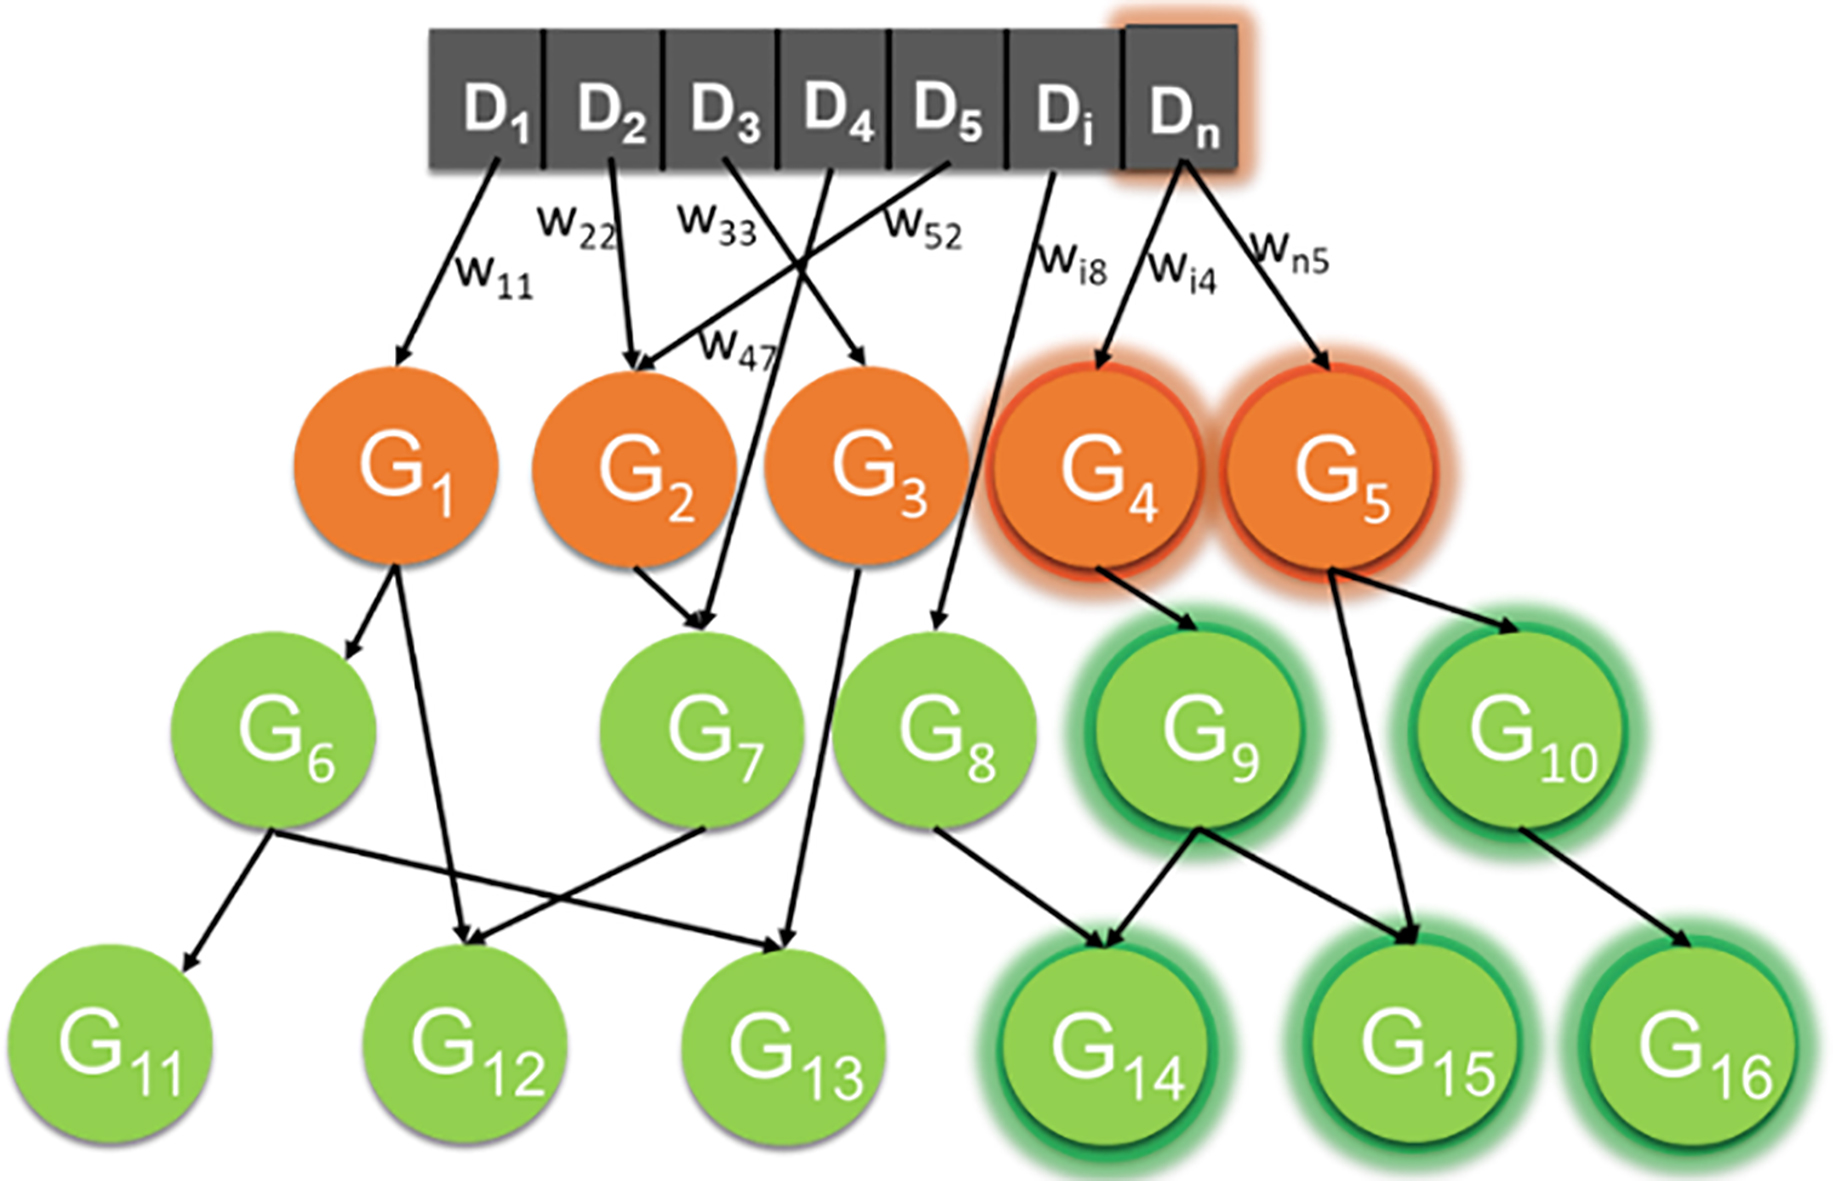 Example of a drive-goal graph. The arrows represent the different connections between drives (D1,…,Dn), goals and sub-goals. Thus, the activation of a drive will propagate throughout the tree activating all its associated goals and sub-goals (as highlighted in the figure with the activation of (Dn).